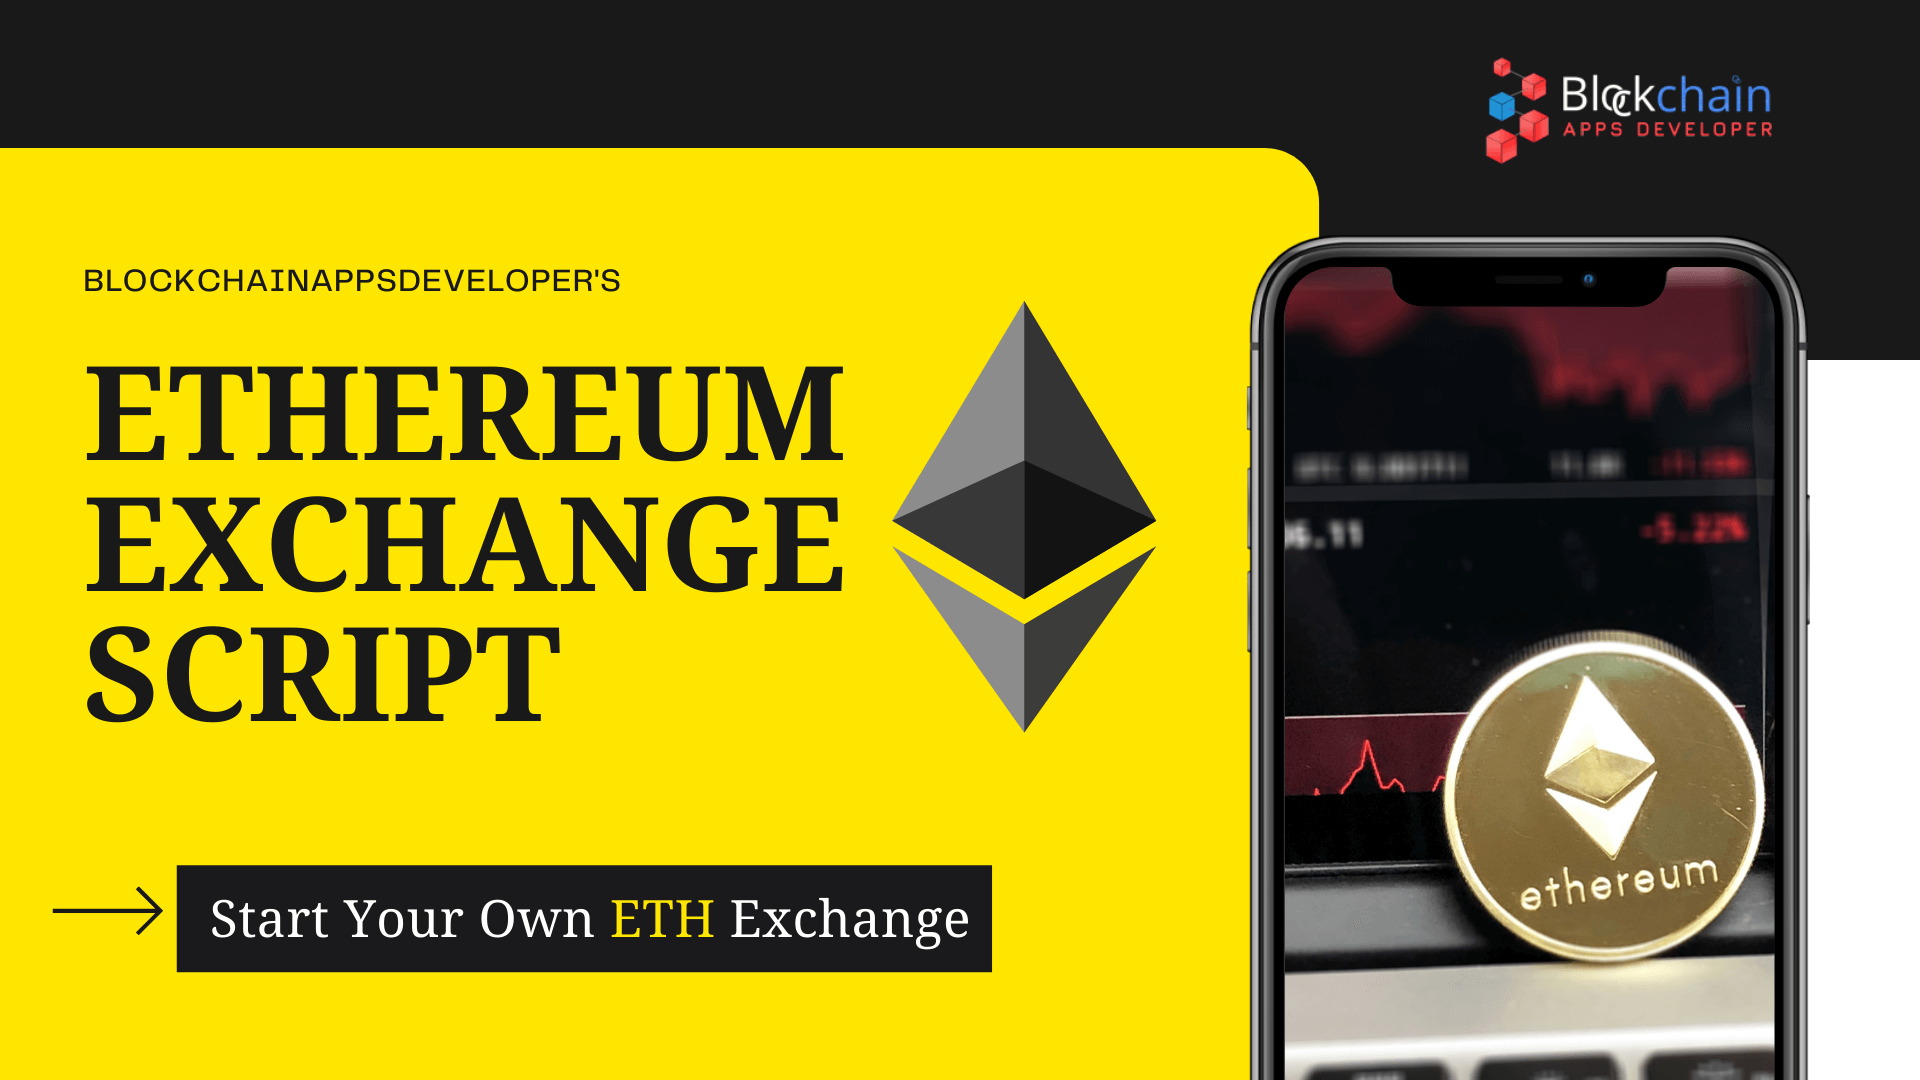 Ethereum Exchange Script To Launch Your Own ETH Exchange Instantly!